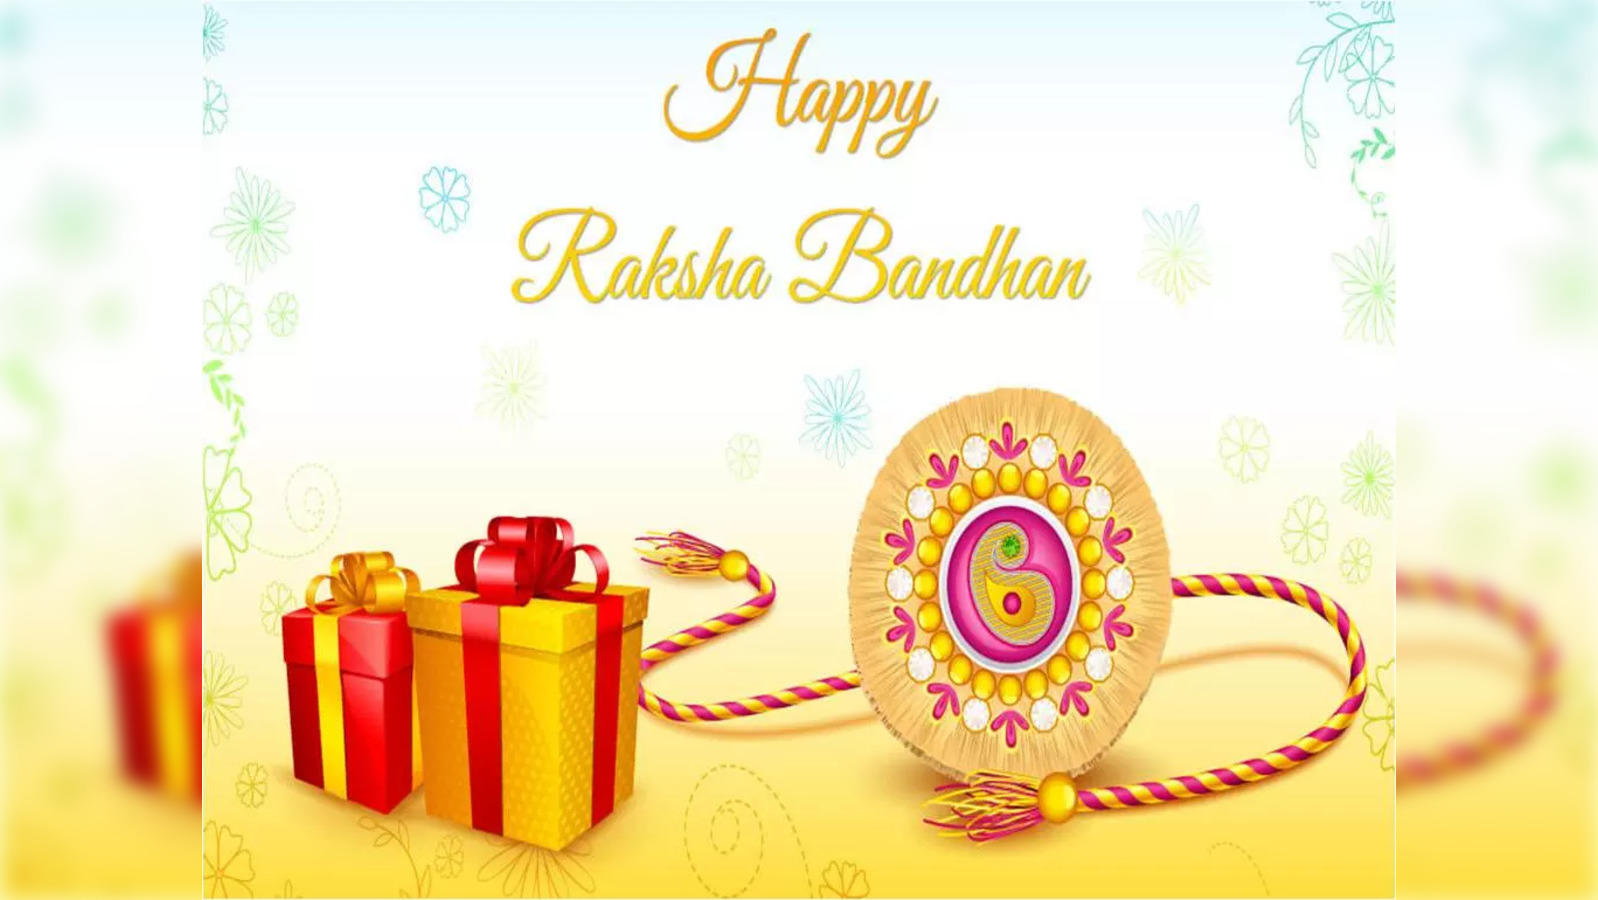 BOGATCHI 9 Chocolate Box 5 Rakhi Roli Chawal and Greeting Card A | Unique  Rakhi Gifts for Sister | Rakhi with Chocolate Online